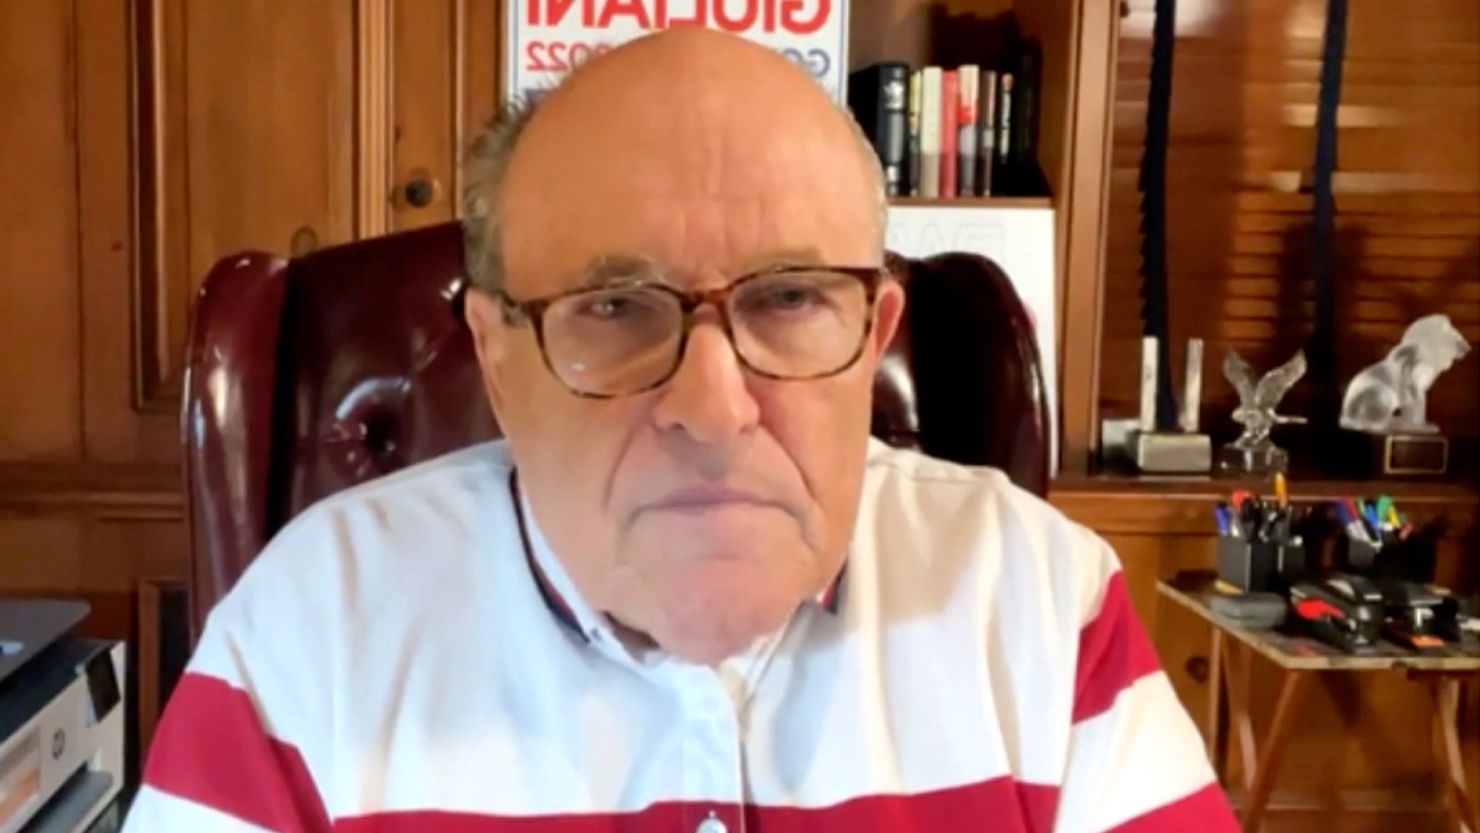 Rudy Giuliani speaks during a virtual news conference on the incident via Facebook.